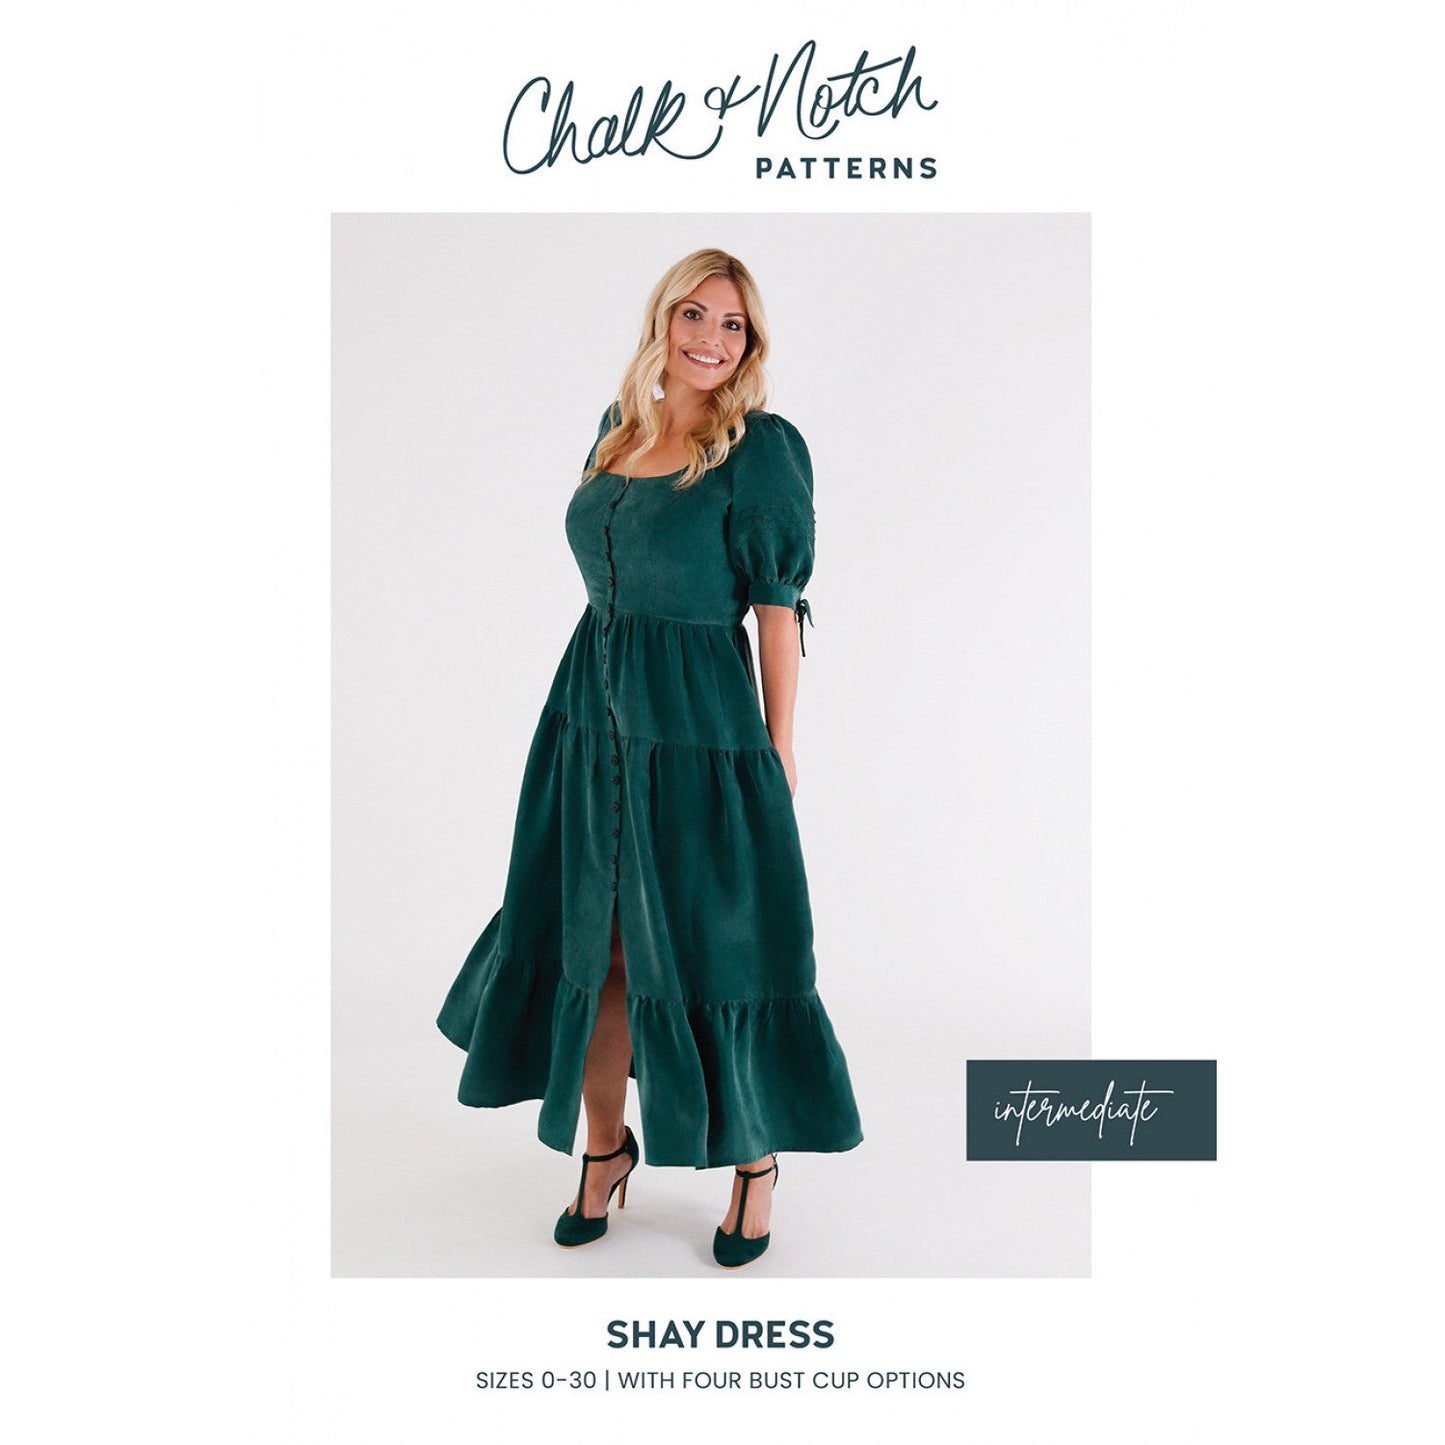 Chalk and Notch Shay Dress Paper Pattern-Pattern-Spool of Thread